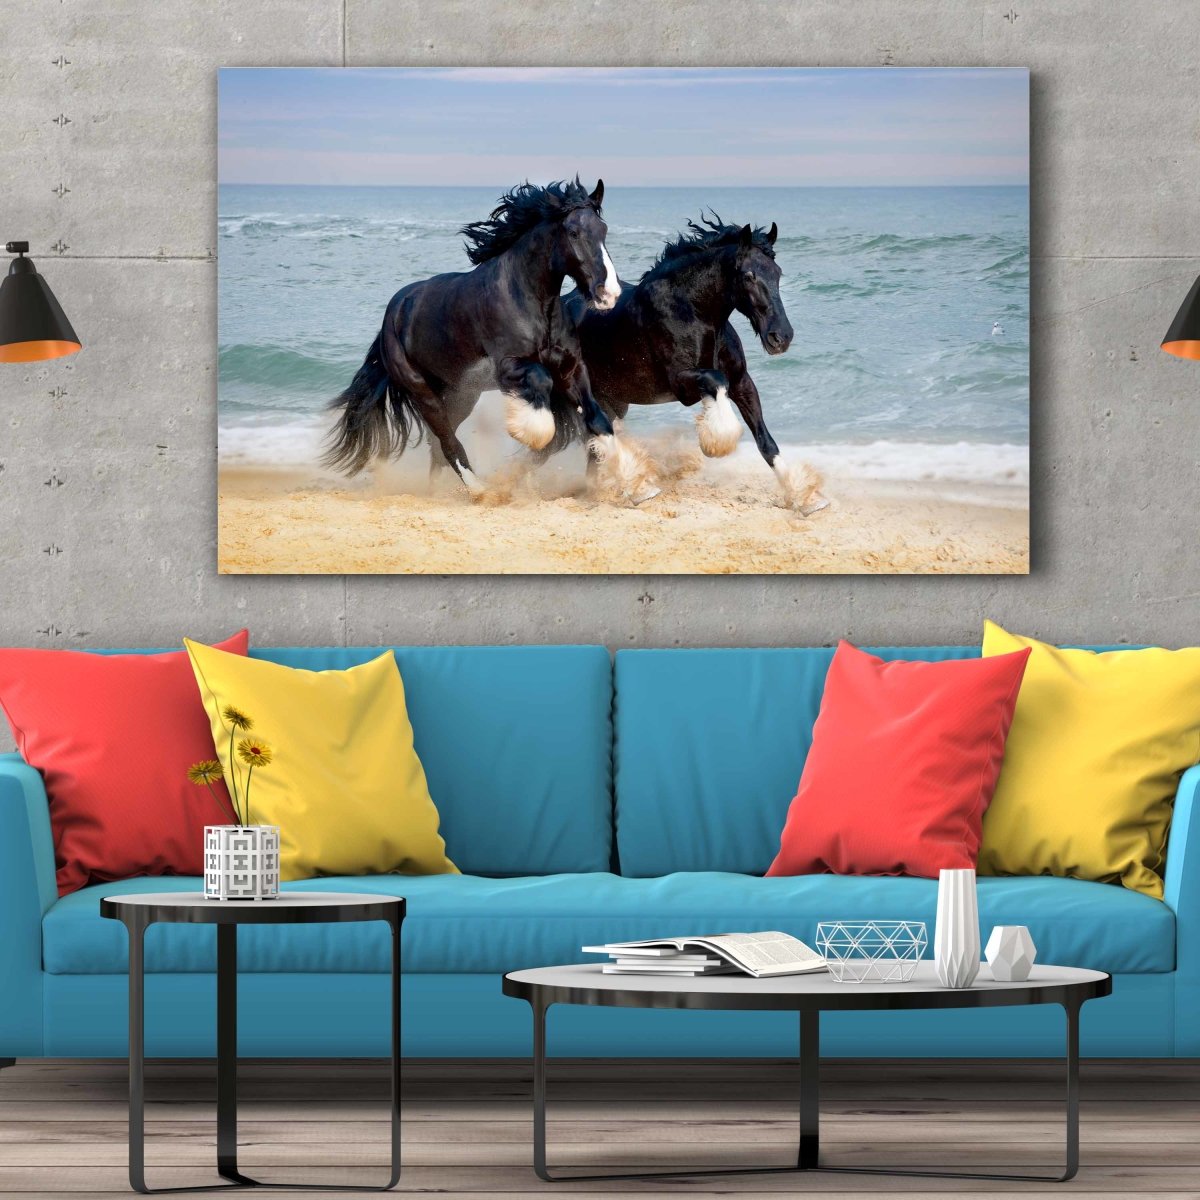 Tablou Canvas Galloping Horses - clevny.ro